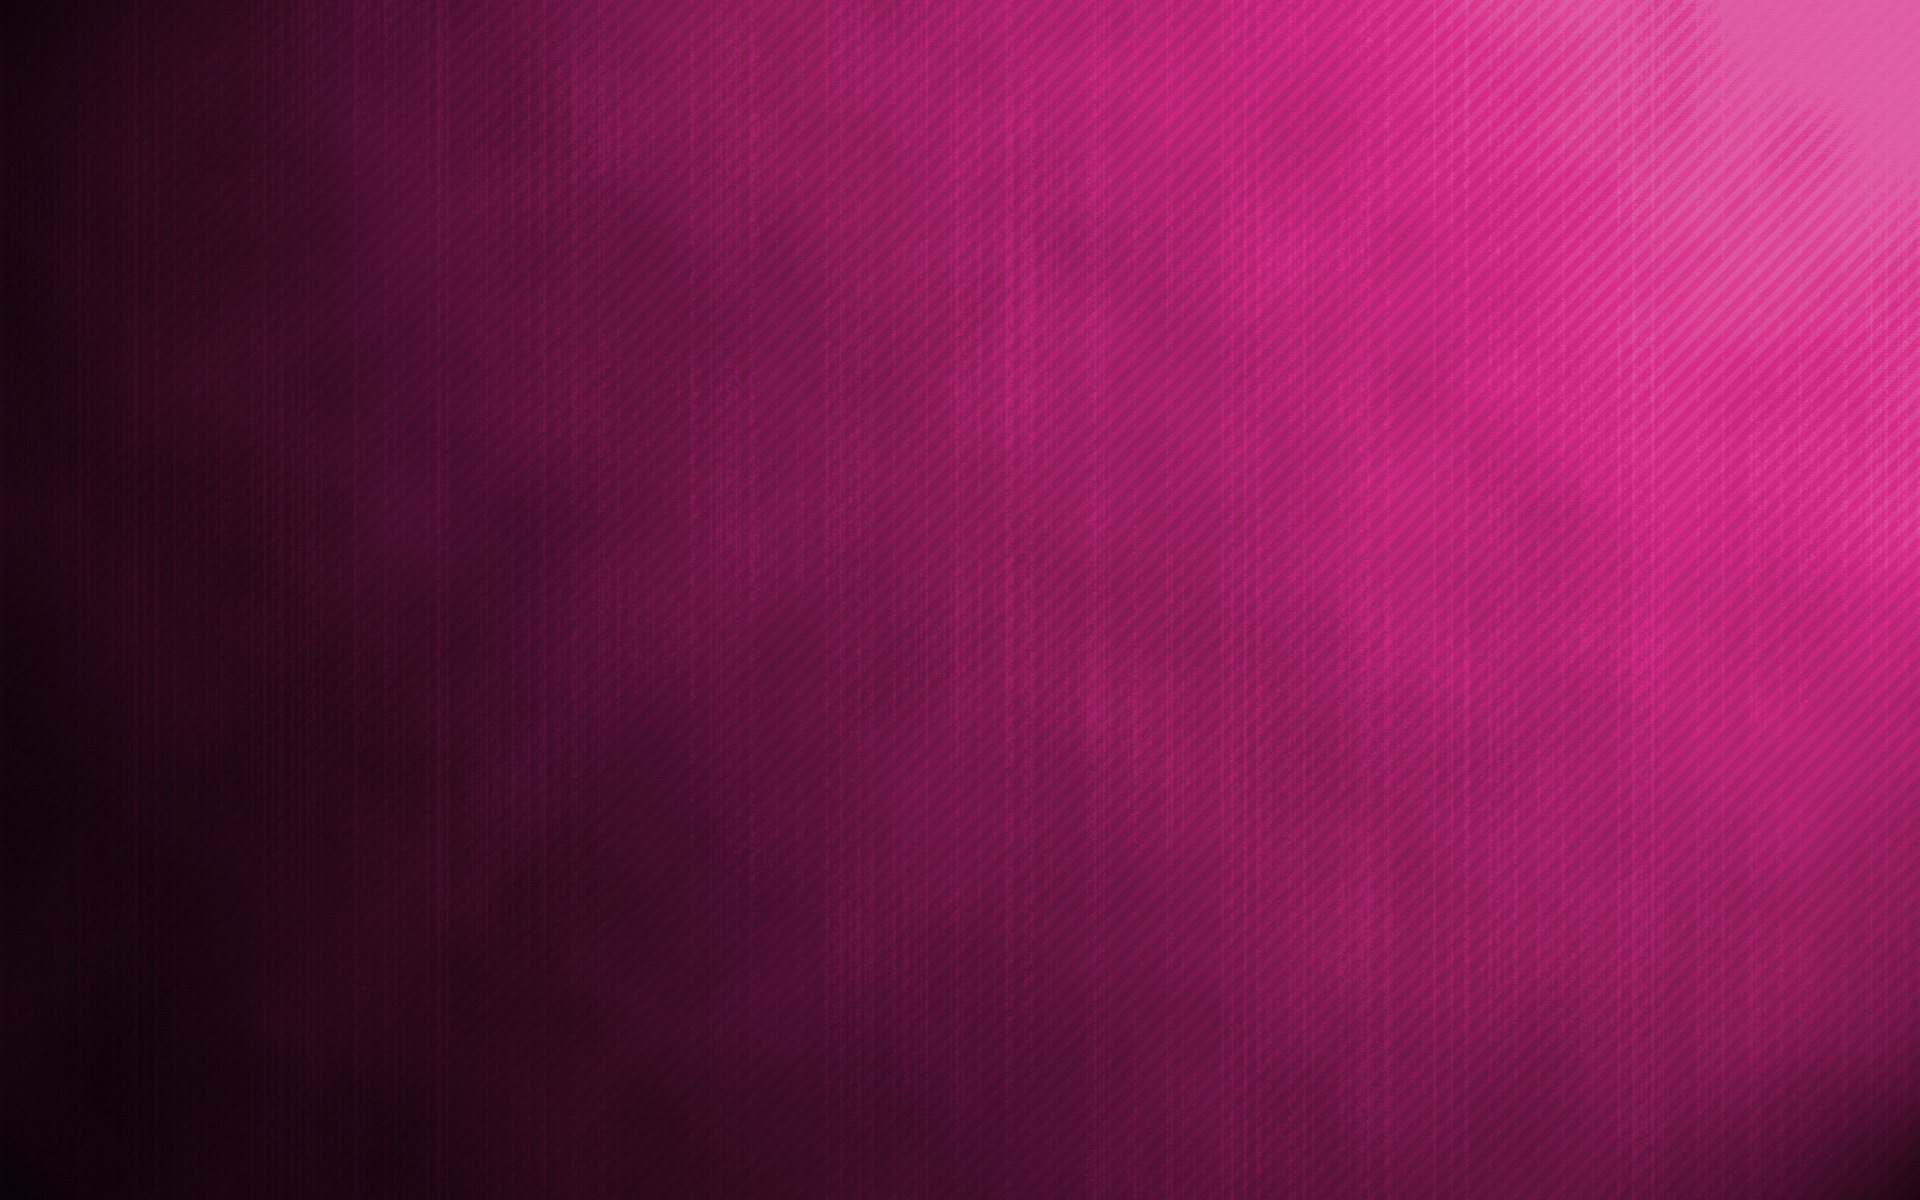 Cool Pink Background Submited Image